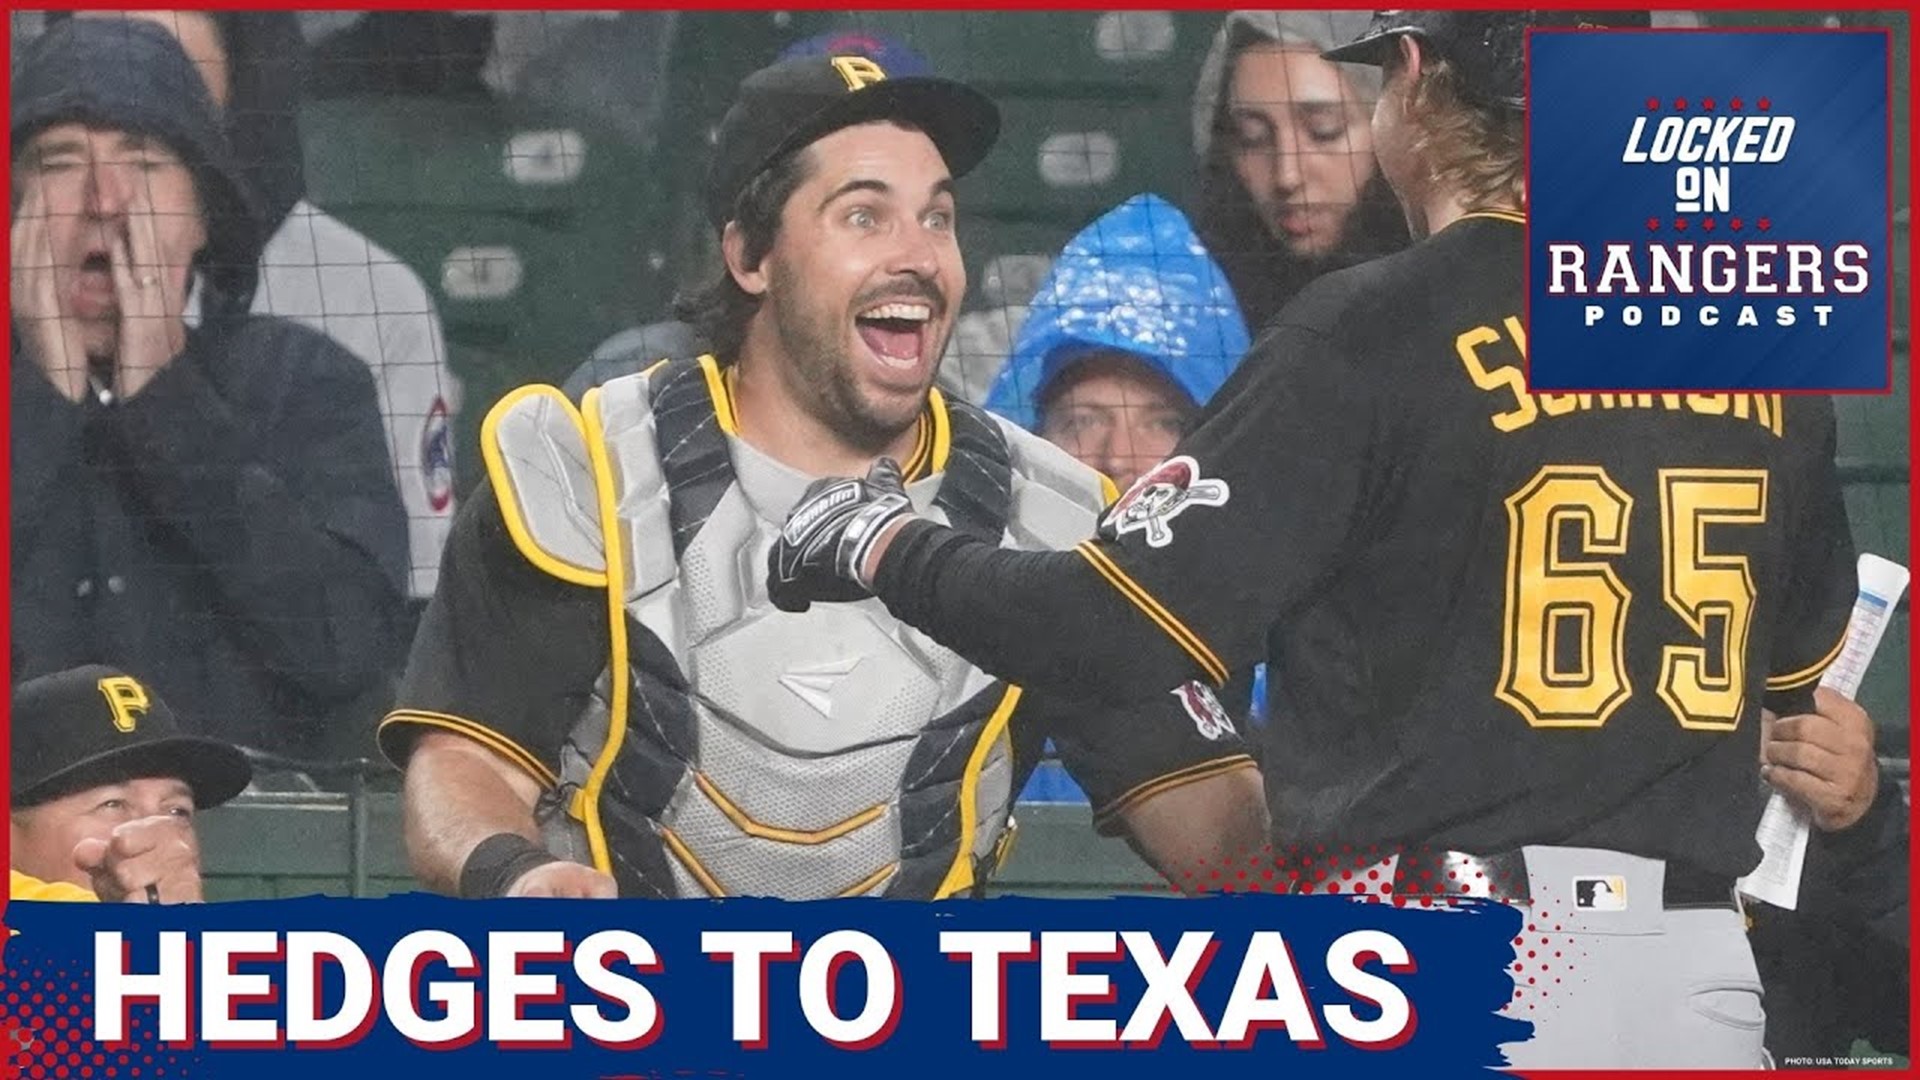 The Texas Rangers trade for Pittsburgh Pirates catcher Austin Hedges as final trade deadline acquisition. The Rangers made big trades for Max Scherzer,